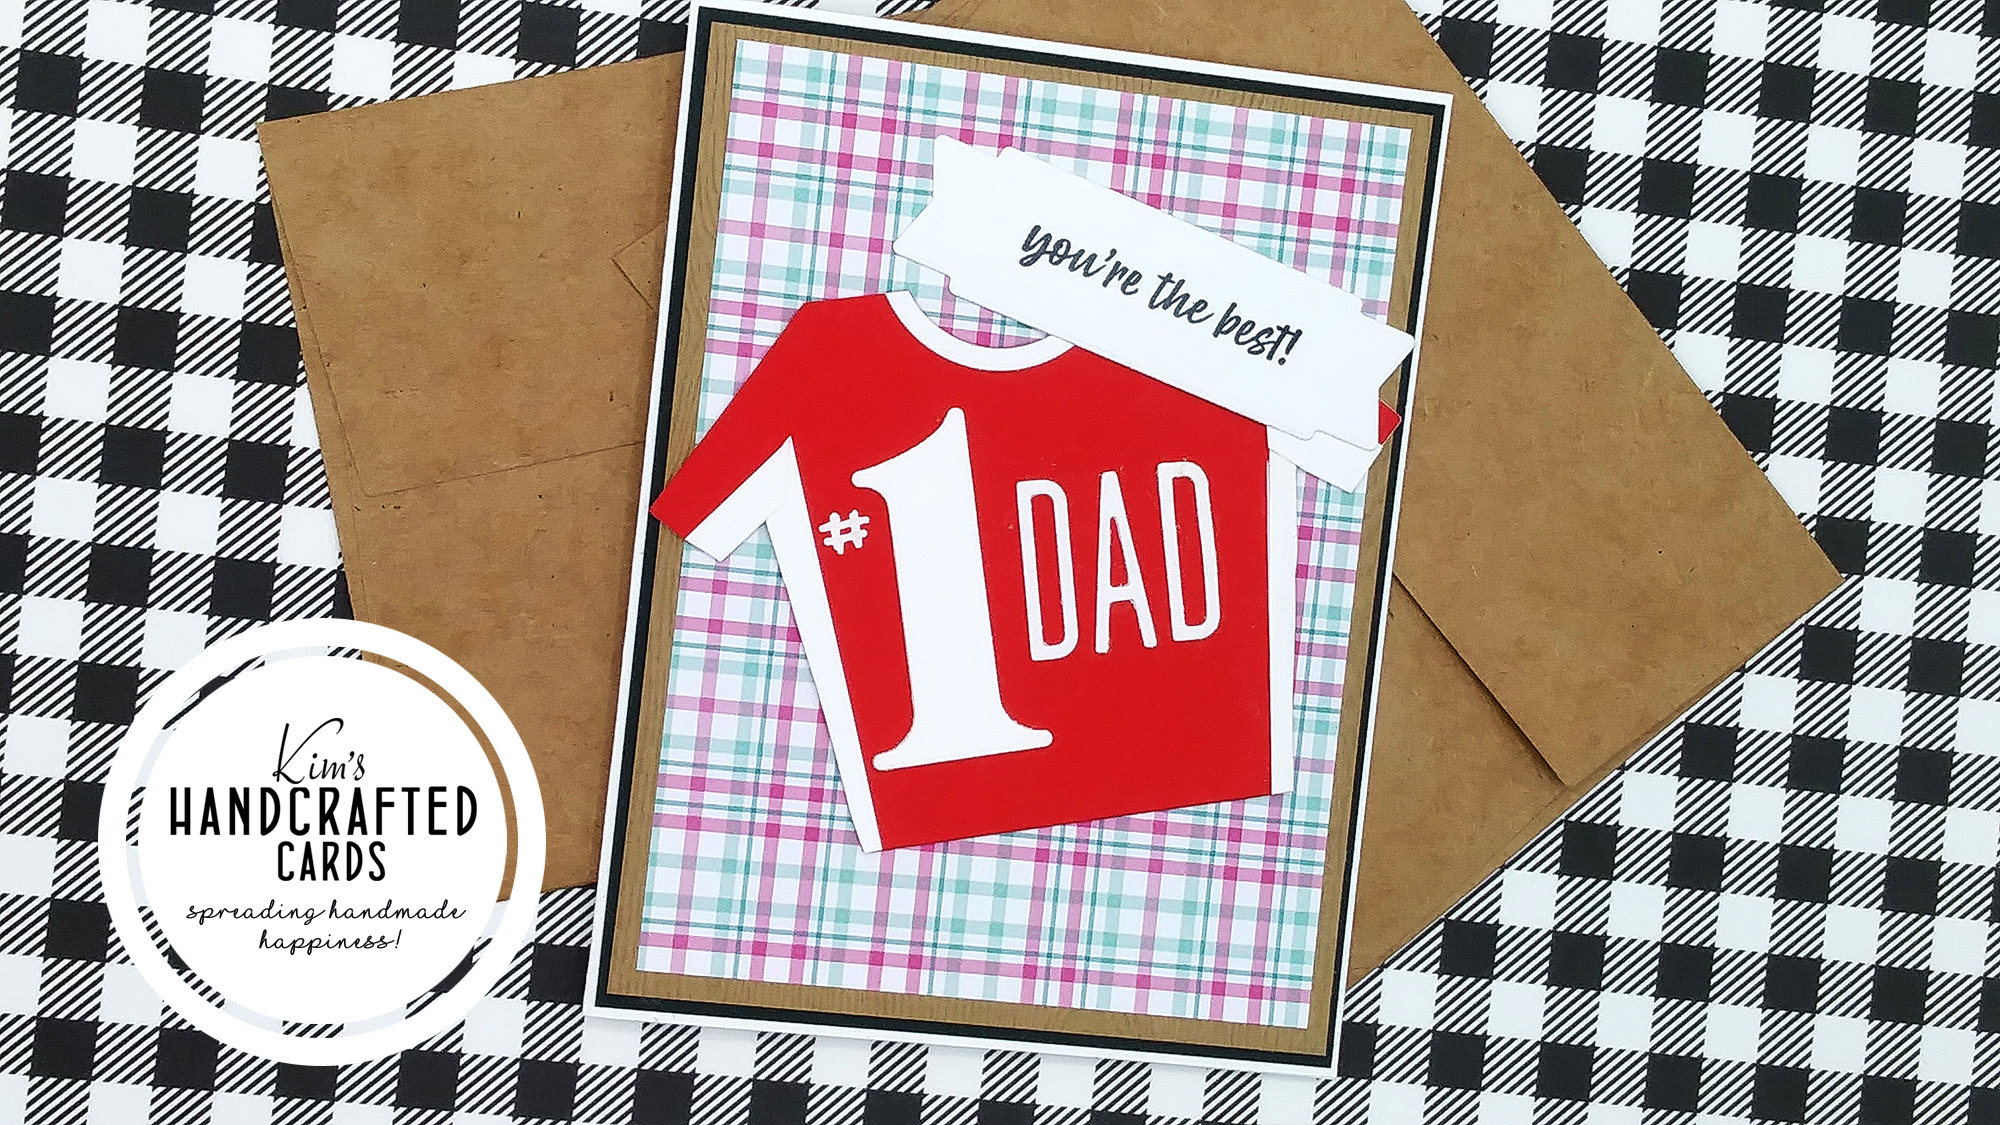 A Creative Accident turned into a Wonder Father's Day Card